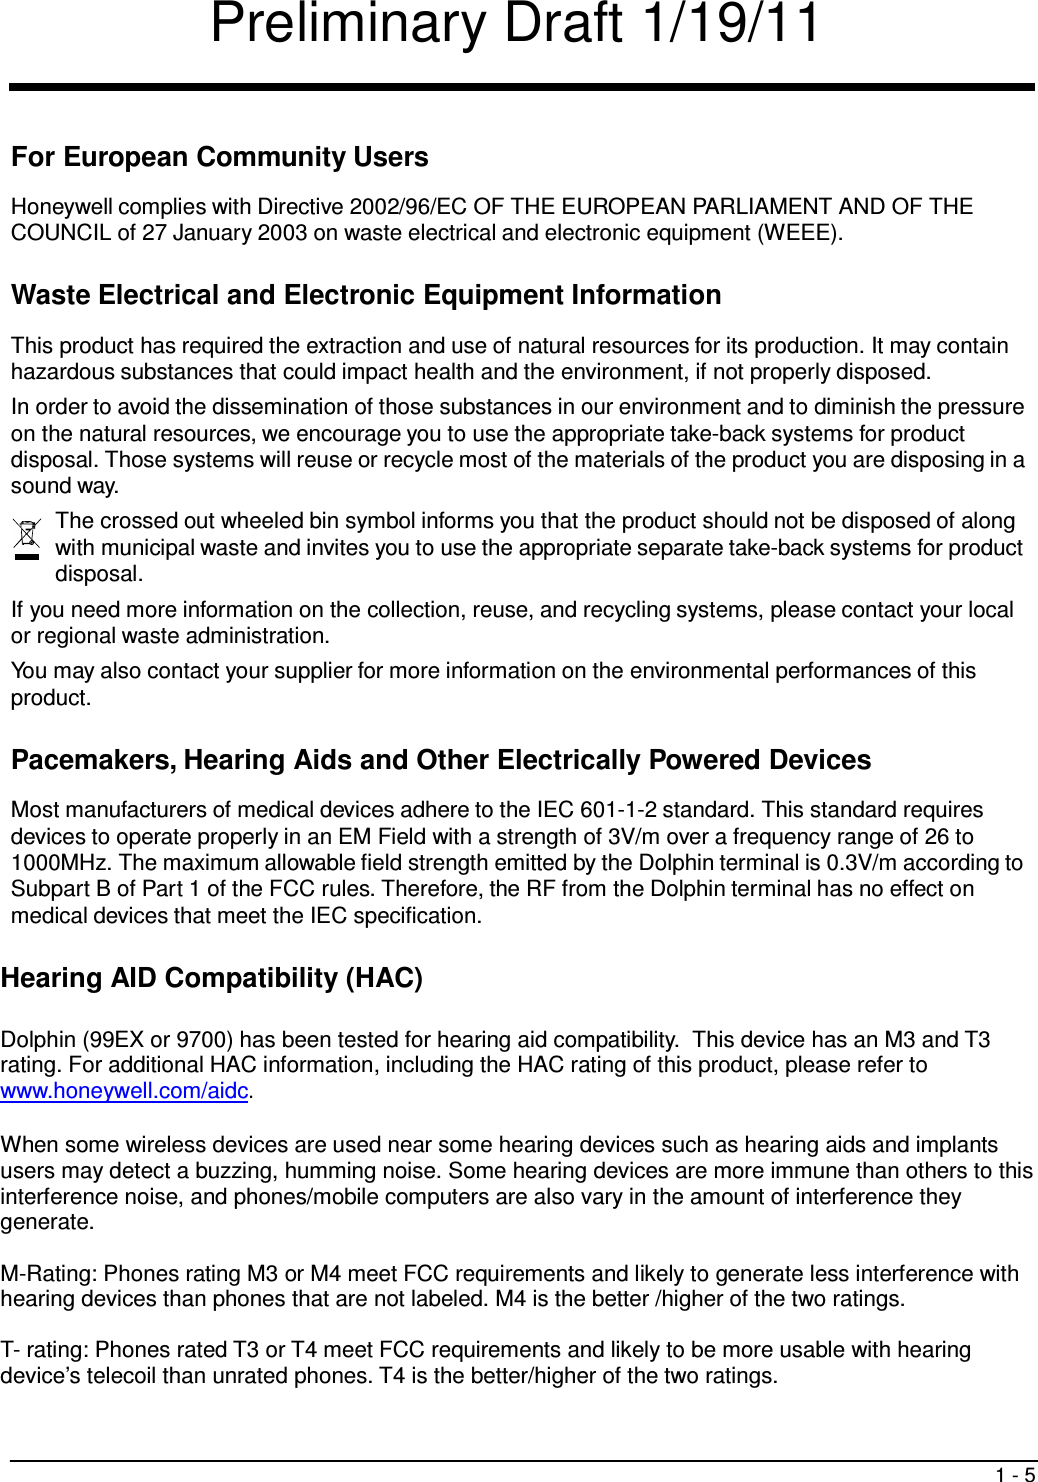 Preliminary Draft 1/19/11 1 - 5     For European Community Users  Honeywell complies with Directive 2002/96/EC OF THE EUROPEAN PARLIAMENT AND OF THE COUNCIL of 27 January 2003 on waste electrical and electronic equipment (WEEE).   Waste Electrical and Electronic Equipment Information  This product has required the extraction and use of natural resources for its production. It may contain hazardous substances that could impact health and the environment, if not properly disposed. In order to avoid the dissemination of those substances in our environment and to diminish the pressure on the natural resources, we encourage you to use the appropriate take-back systems for product disposal. Those systems will reuse or recycle most of the materials of the product you are disposing in a sound way. The crossed out wheeled bin symbol informs you that the product should not be disposed of along with municipal waste and invites you to use the appropriate separate take-back systems for product disposal. If you need more information on the collection, reuse, and recycling systems, please contact your local or regional waste administration. You may also contact your supplier for more information on the environmental performances of this product.   Pacemakers, Hearing Aids and Other Electrically Powered Devices  Most manufacturers of medical devices adhere to the IEC 601-1-2 standard. This standard requires devices to operate properly in an EM Field with a strength of 3V/m over a frequency range of 26 to 1000MHz. The maximum allowable field strength emitted by the Dolphin terminal is 0.3V/m according to Subpart B of Part 1 of the FCC rules. Therefore, the RF from the Dolphin terminal has no effect on medical devices that meet the IEC specification.   Hearing AID Compatibility (HAC)  Dolphin (99EX or 9700) has been tested for hearing aid compatibility.  This device has an M3 and T3 rating. For additional HAC information, including the HAC rating of this product, please refer to www.honeywell.com/aidc.  When some wireless devices are used near some hearing devices such as hearing aids and implants users may detect a buzzing, humming noise. Some hearing devices are more immune than others to this interference noise, and phones/mobile computers are also vary in the amount of interference they generate.   M-Rating: Phones rating M3 or M4 meet FCC requirements and likely to generate less interference with hearing devices than phones that are not labeled. M4 is the better /higher of the two ratings.  T- rating: Phones rated T3 or T4 meet FCC requirements and likely to be more usable with hearing device’s telecoil than unrated phones. T4 is the better/higher of the two ratings.  